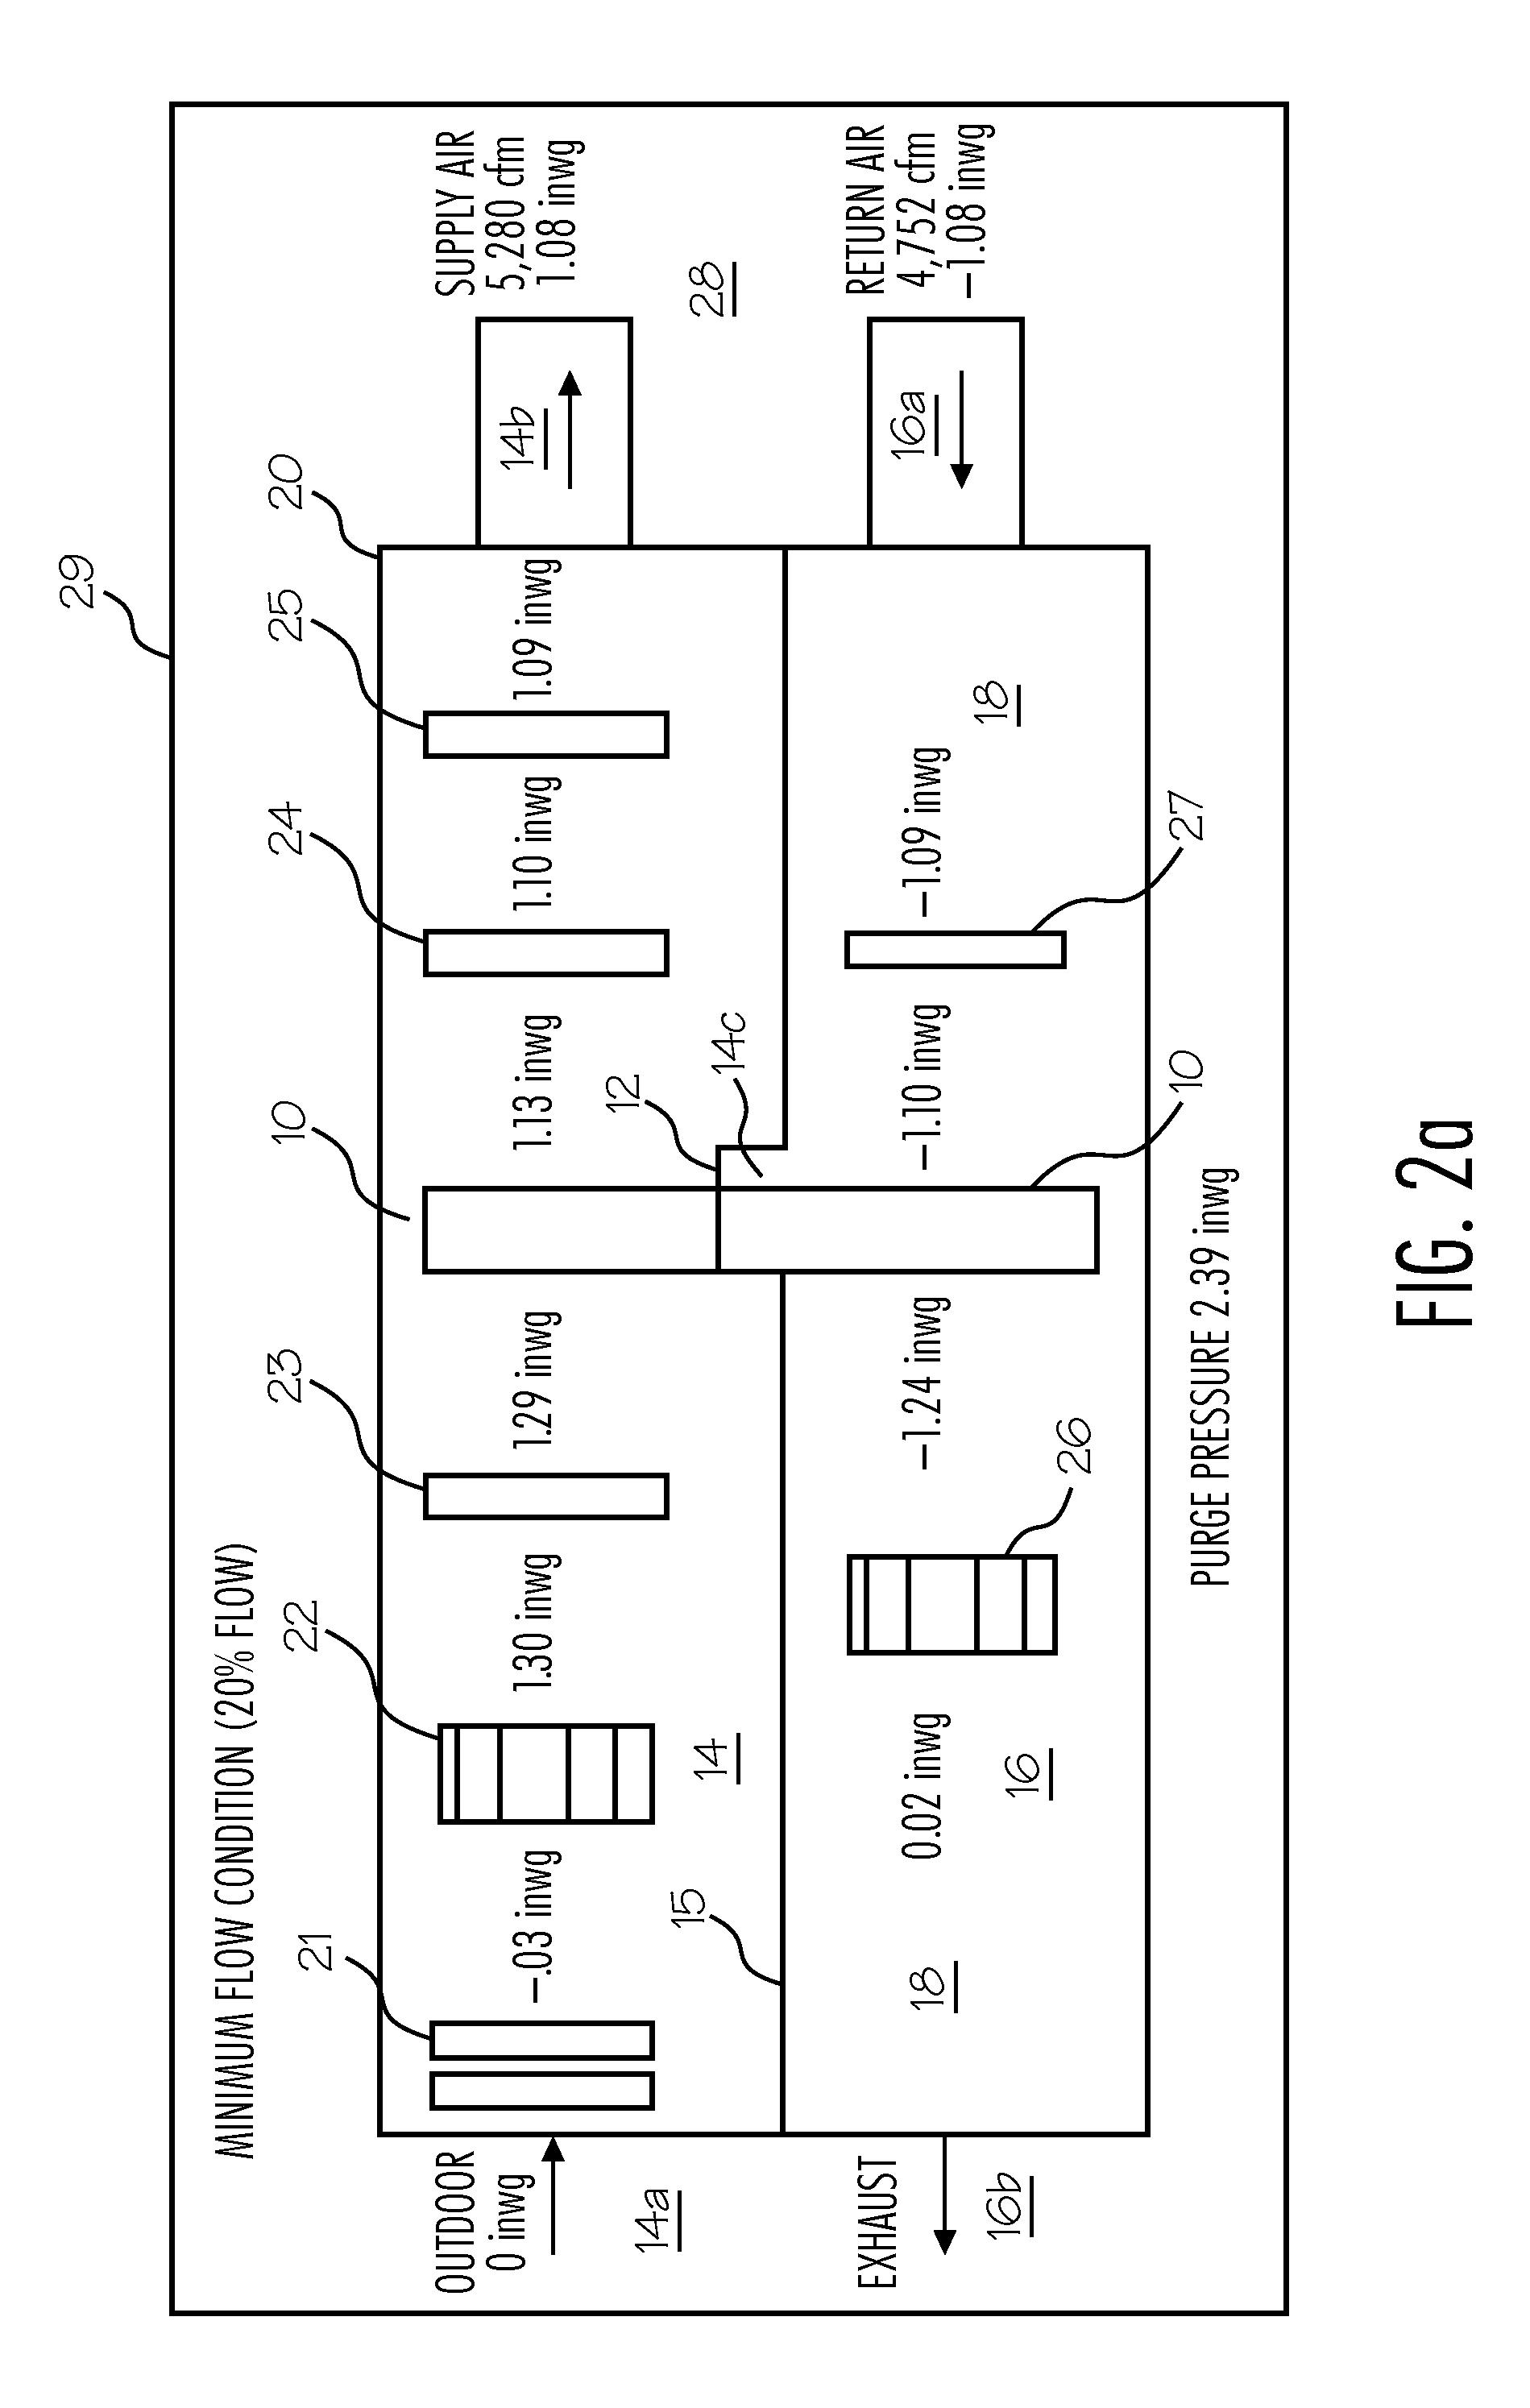 Building, ventilation system, and recovery device control